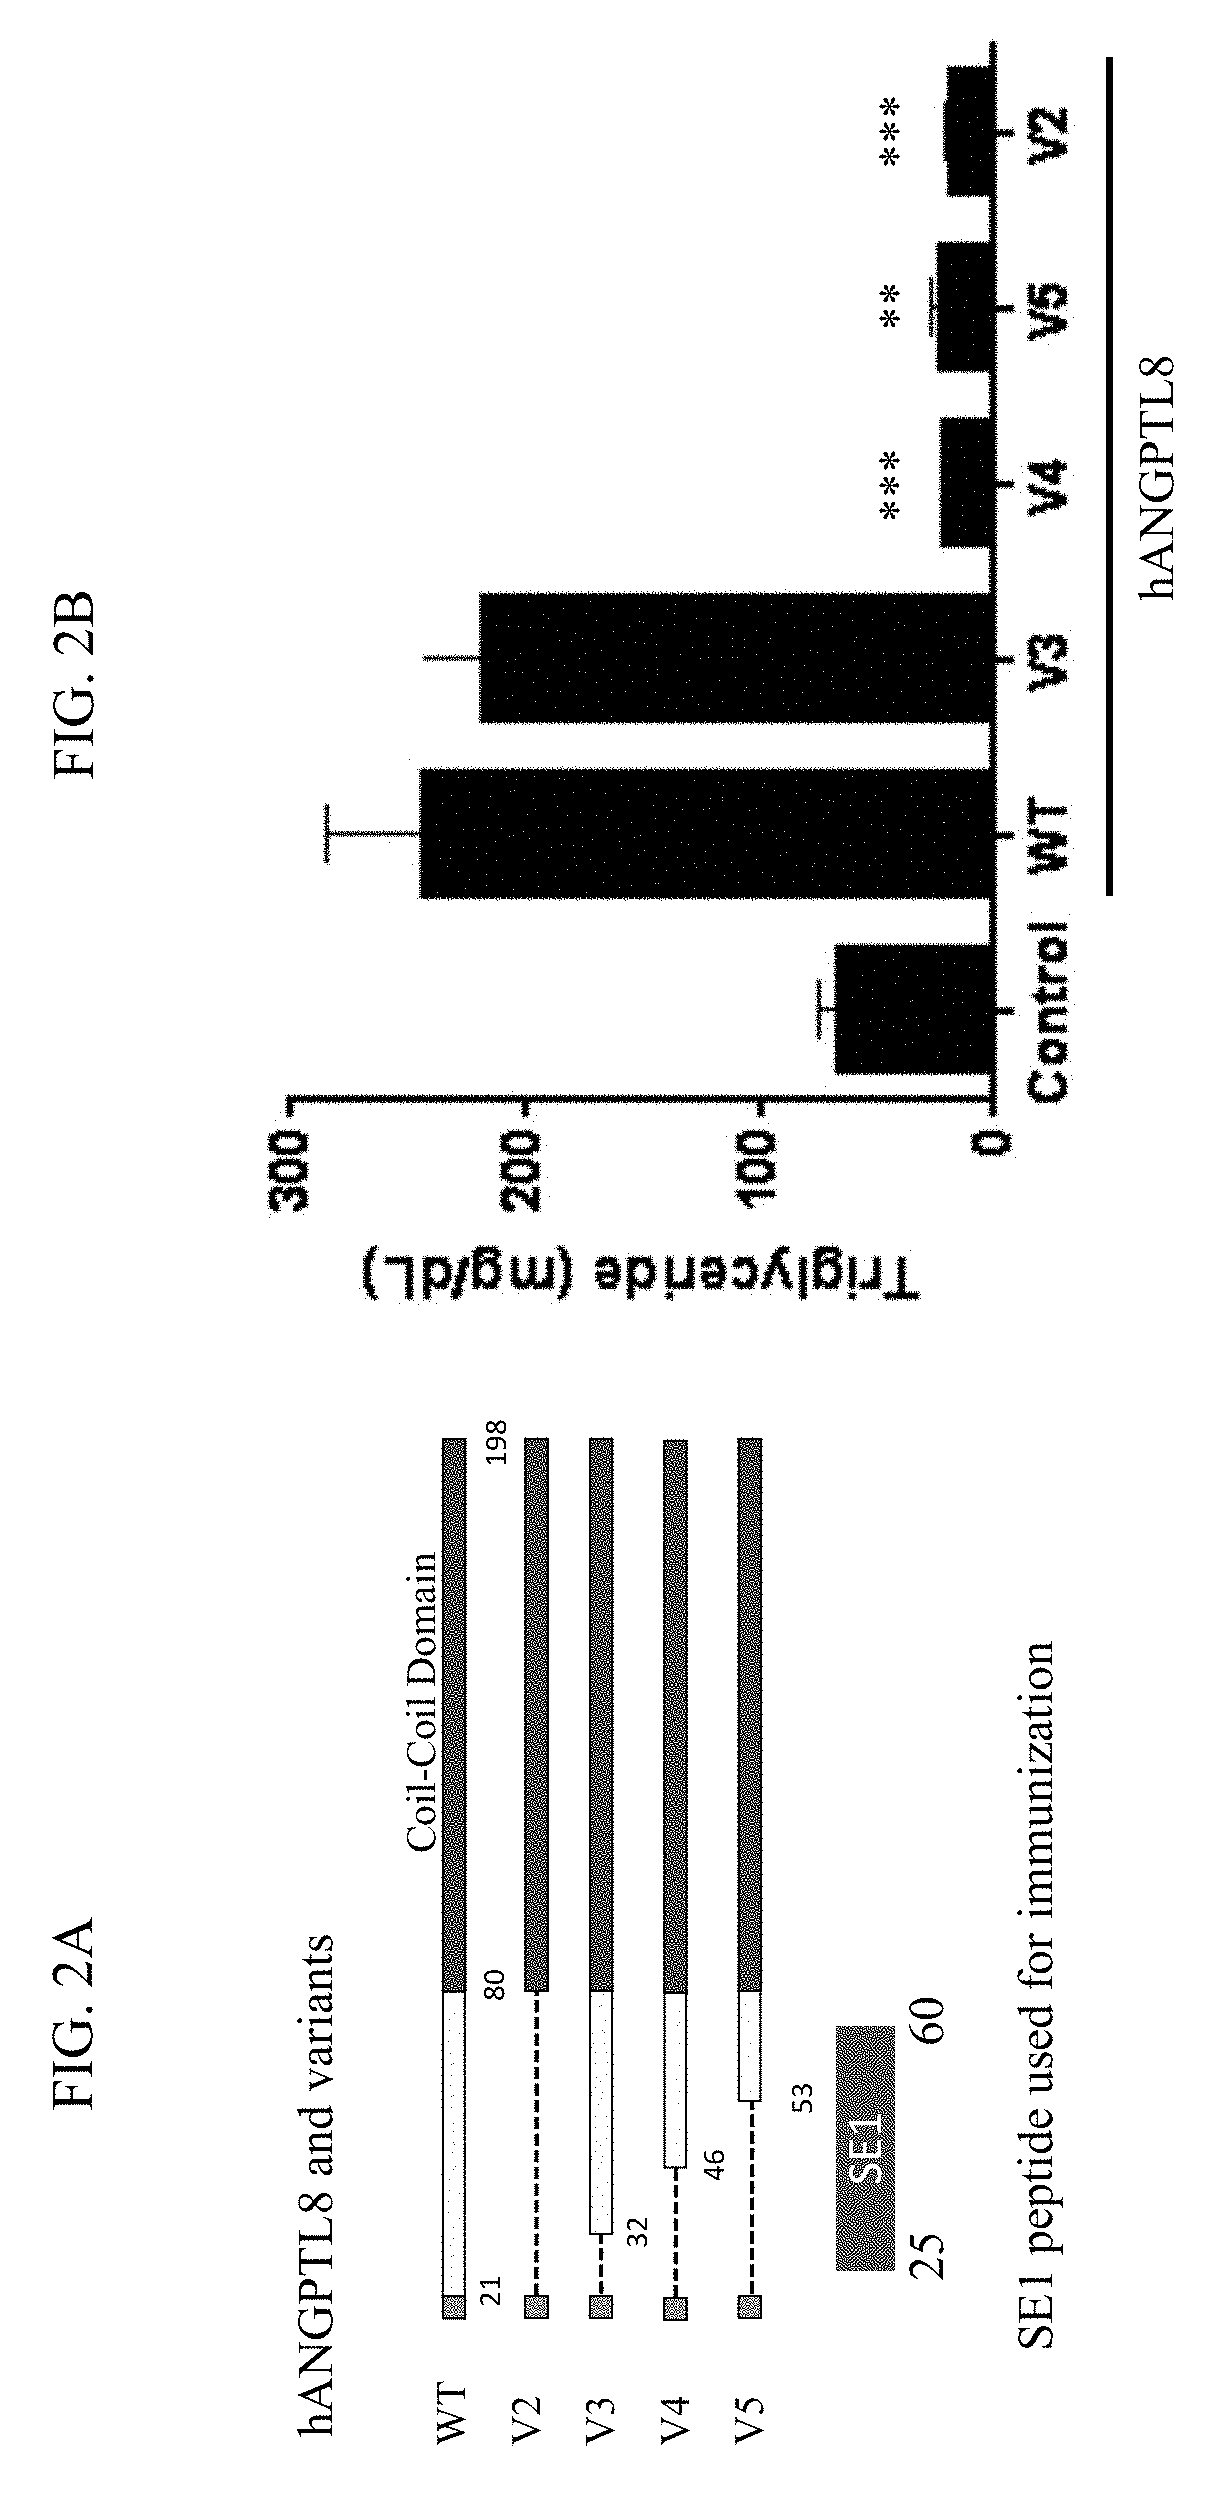 ANGPTL8-binding agents and methods of use thereof